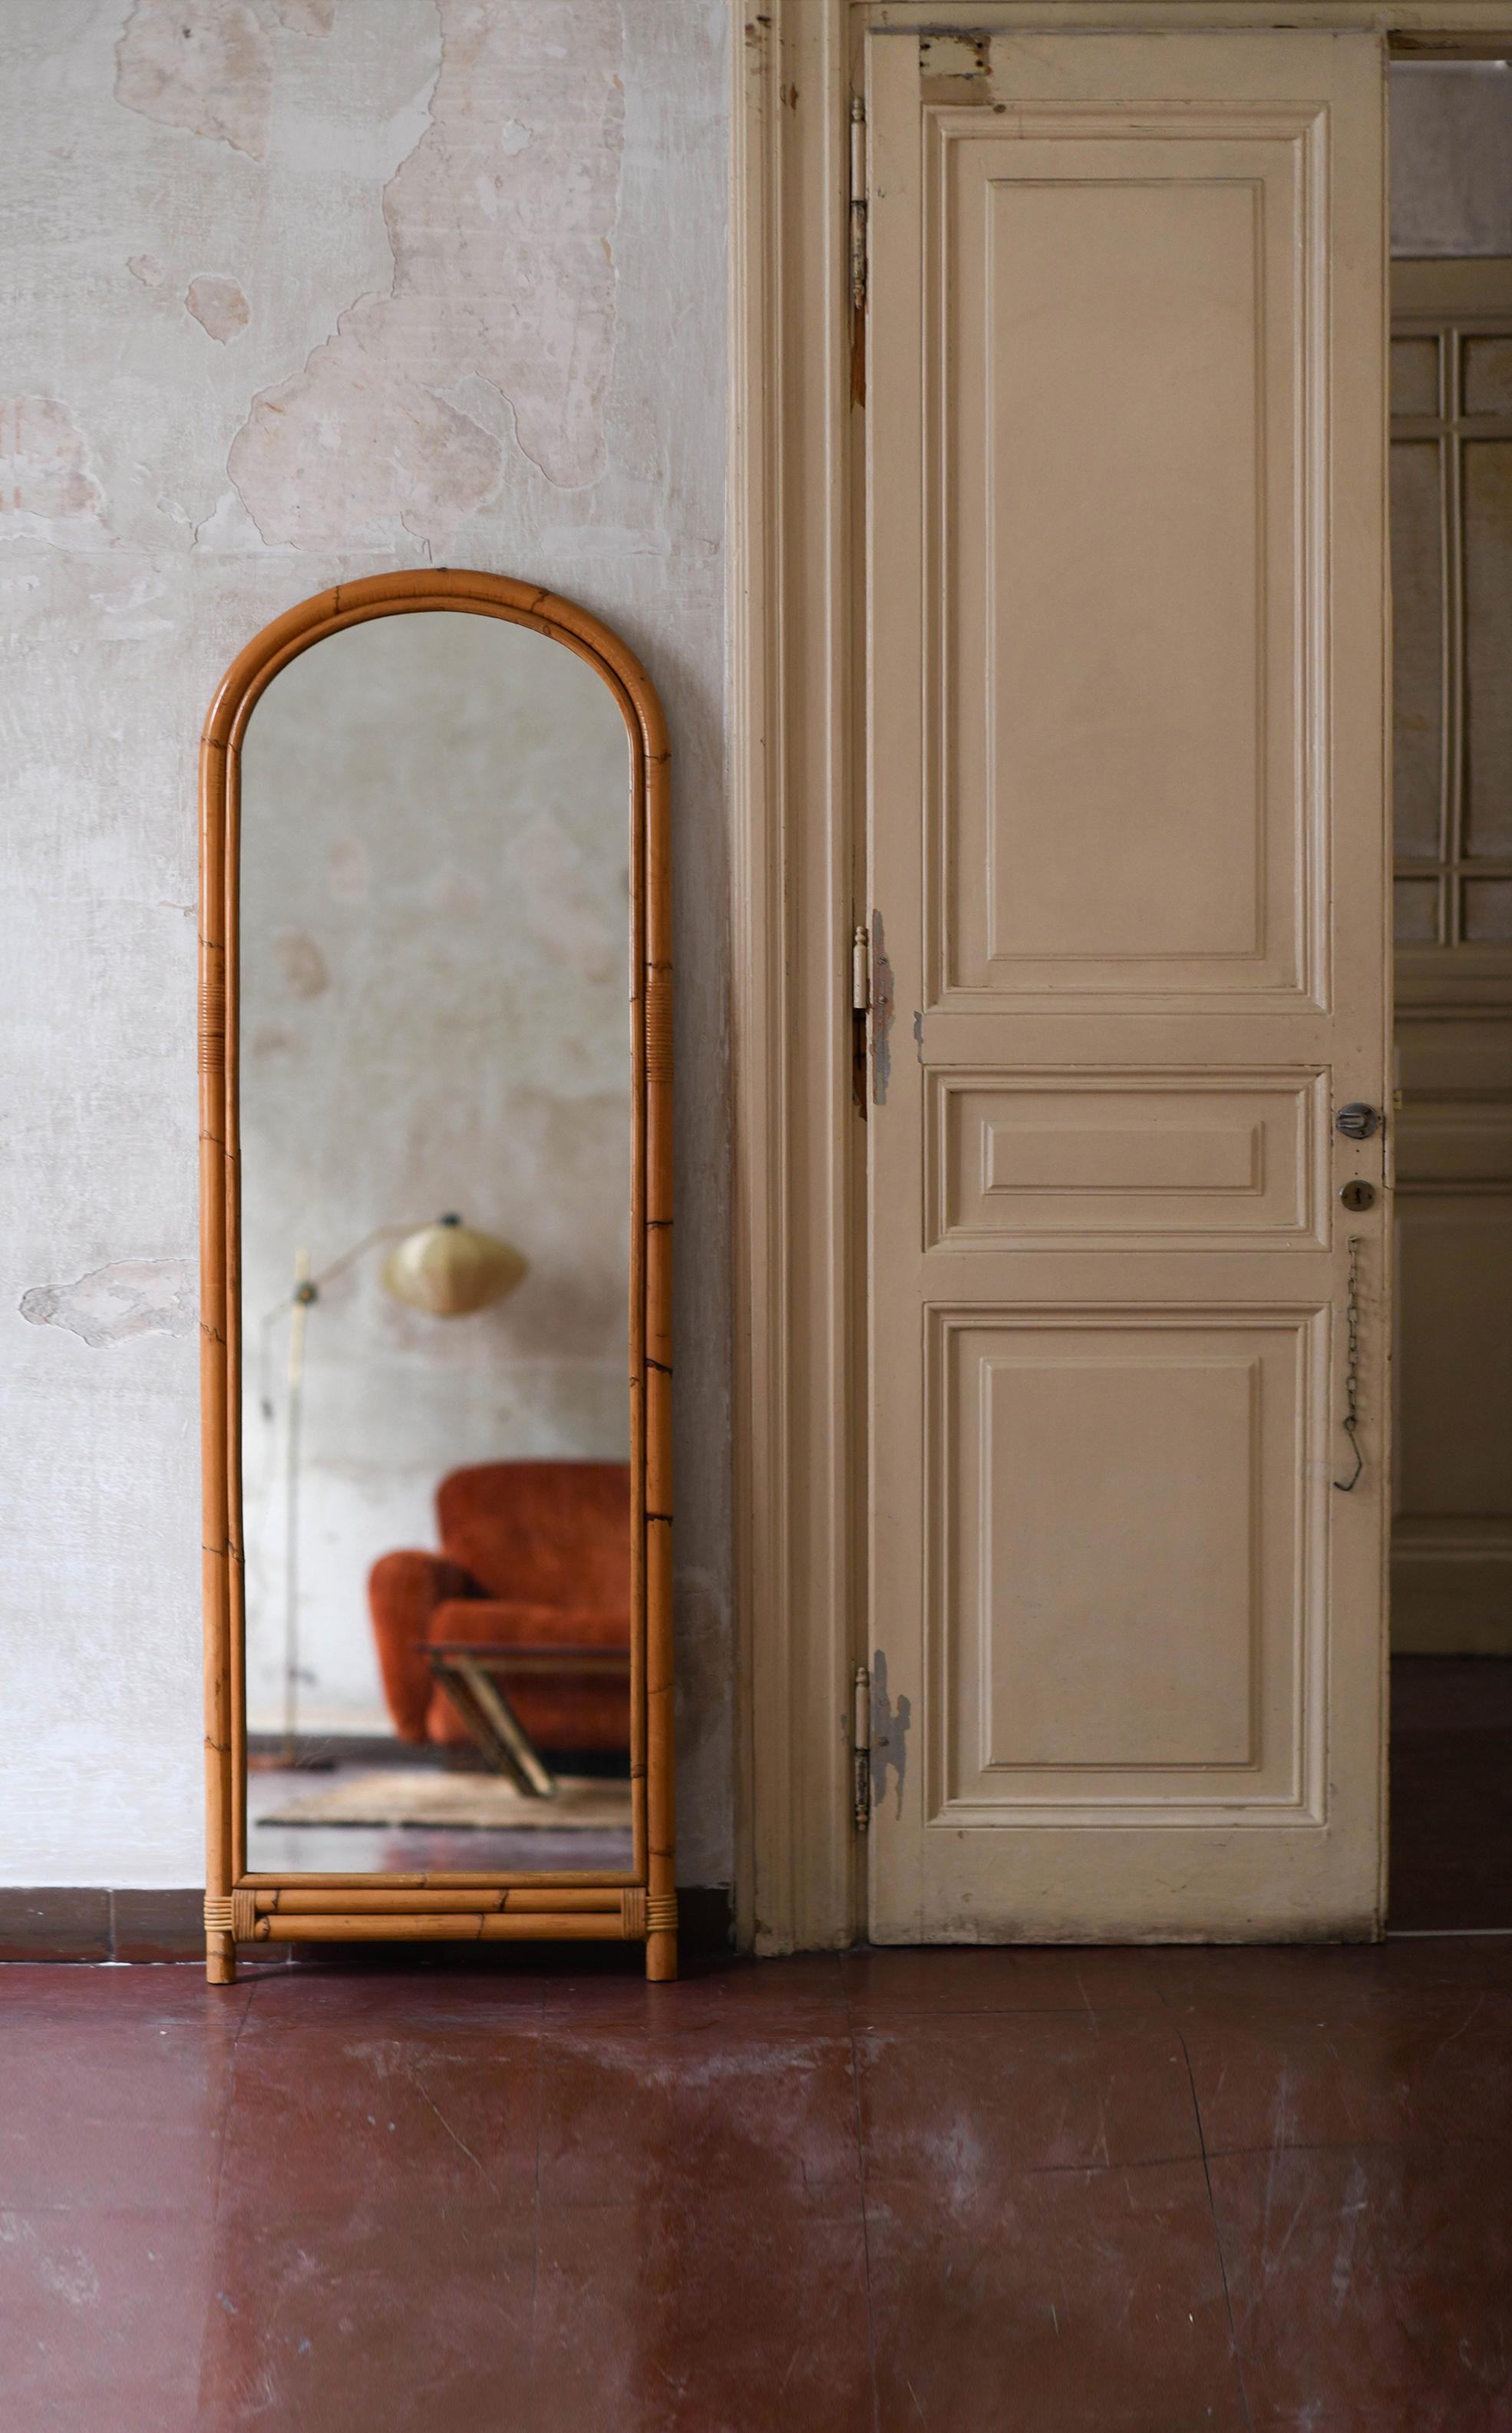 Large “Arco” Floor Mirror In Rush, Italy 1980
Product details
Dimensions: 60 L x 180 H x 4 D cm